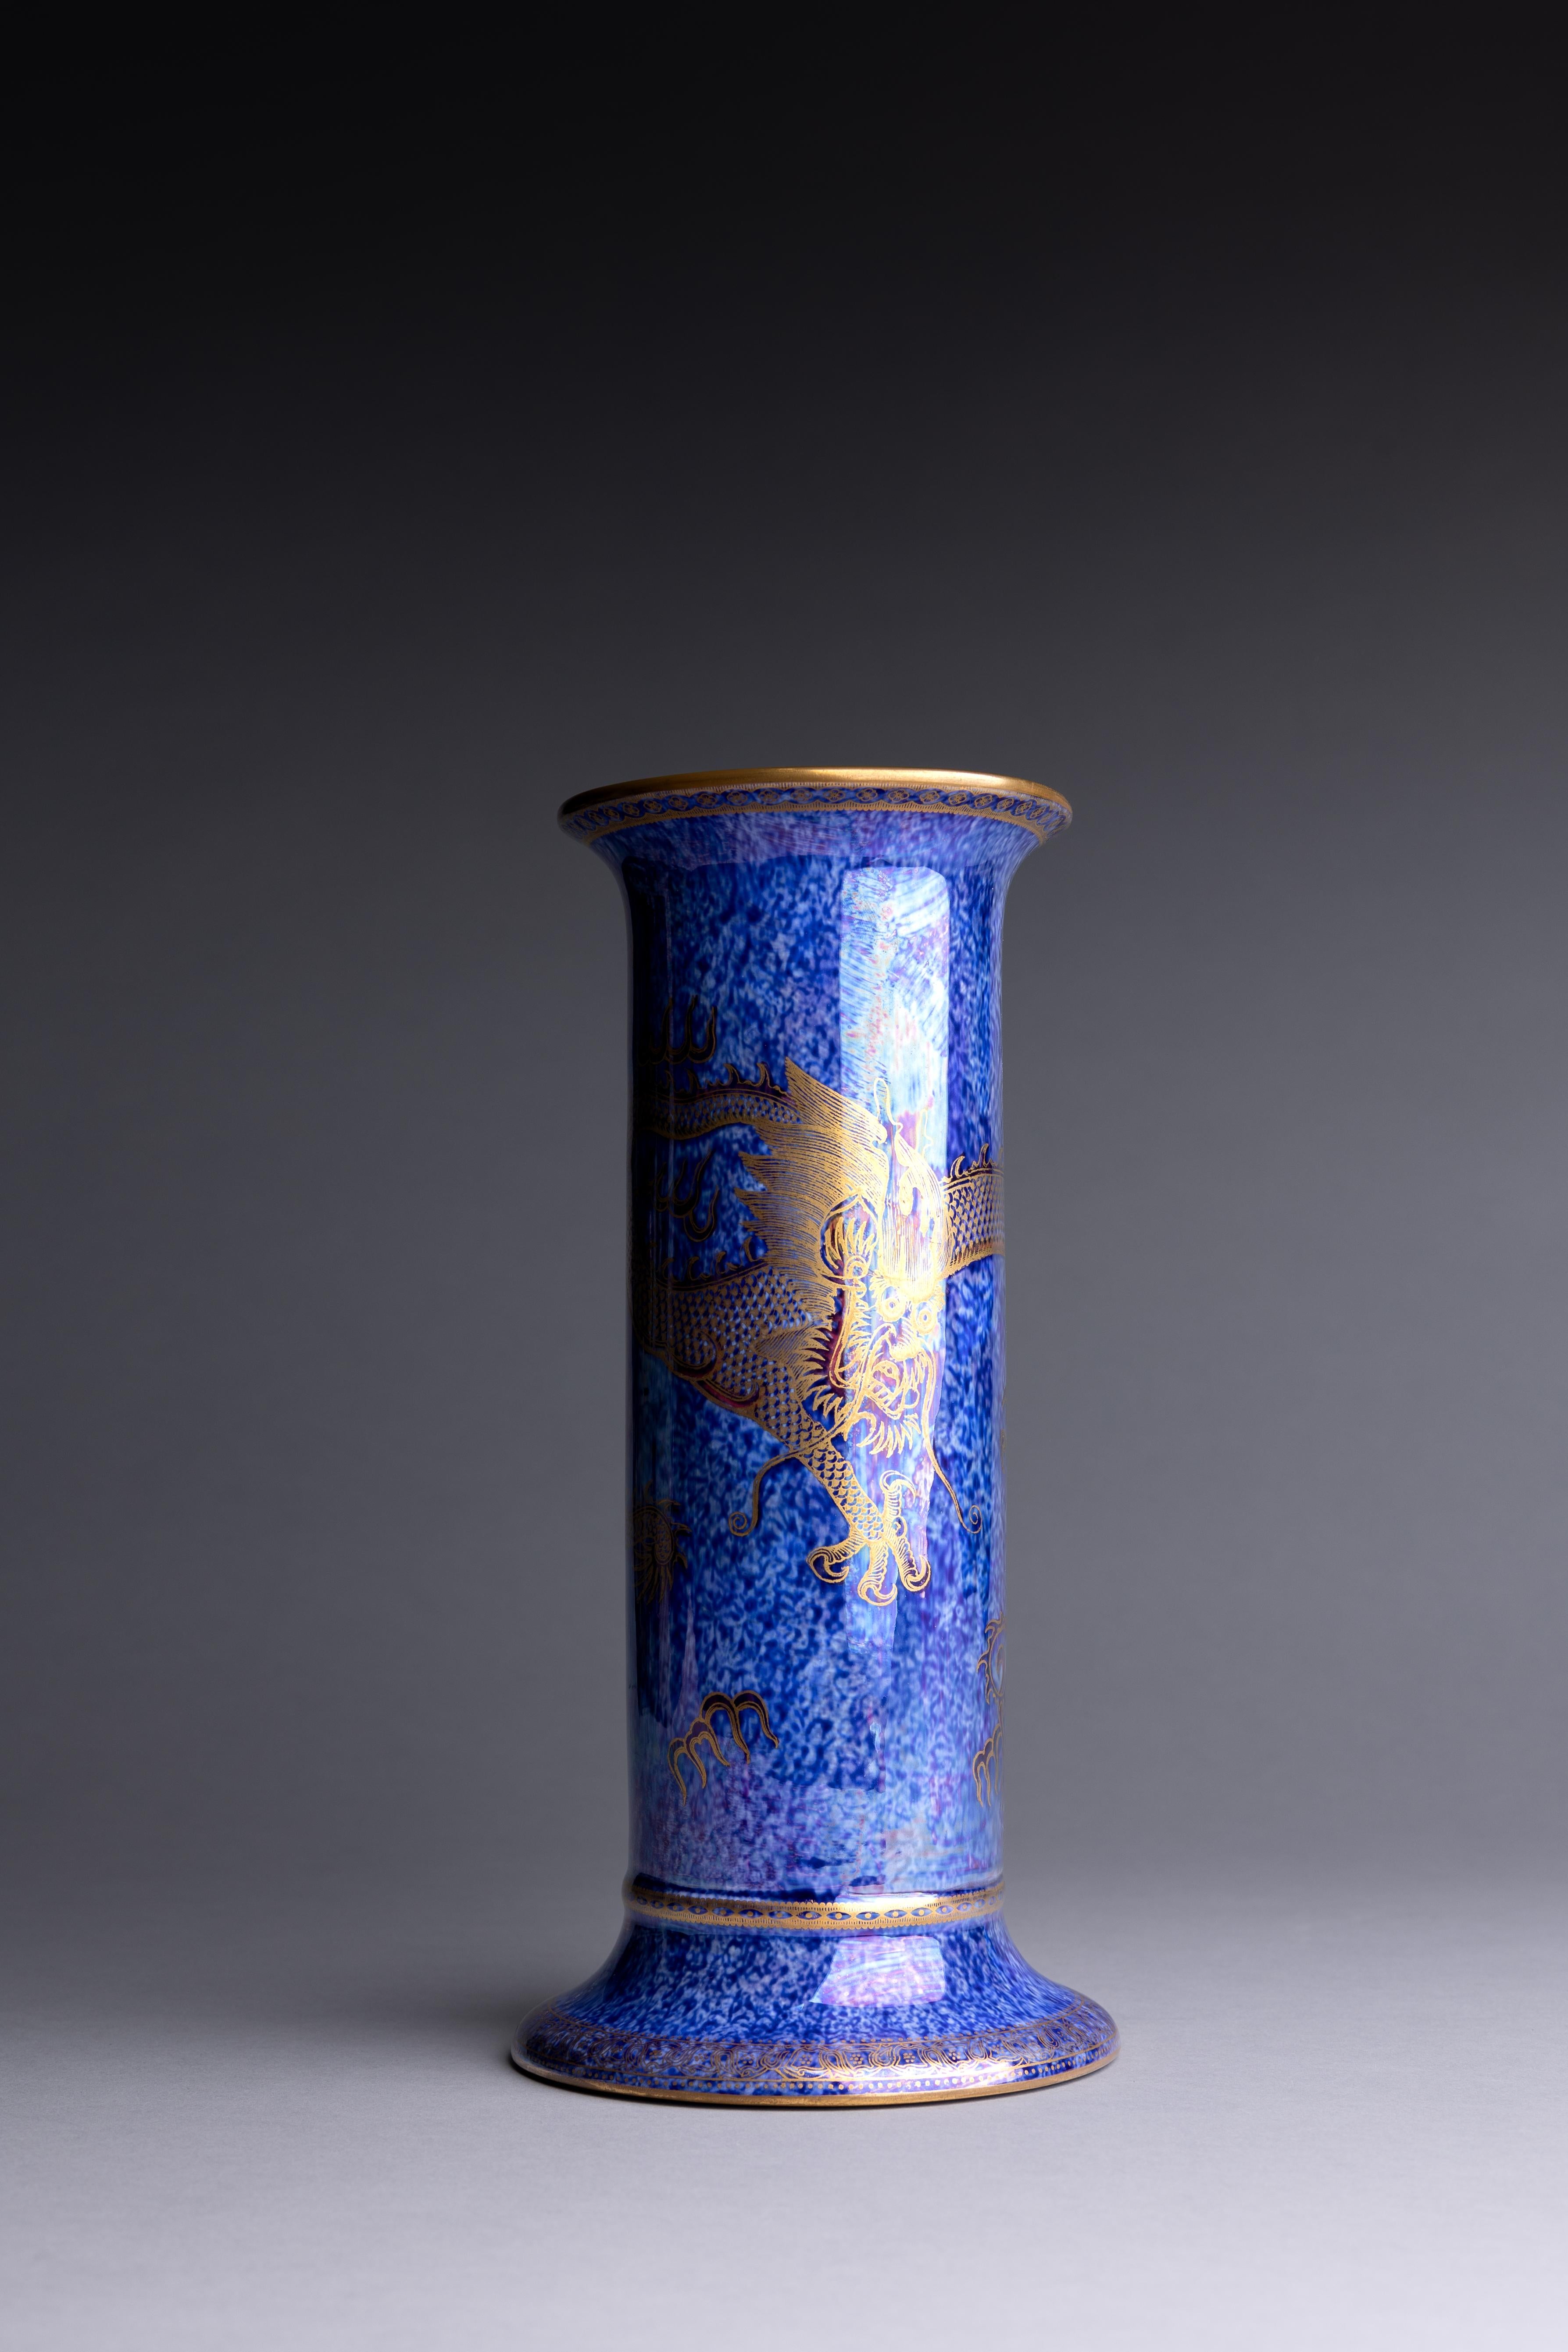 A blue lustre bone china columnar vase with gilded dragon details, designed by Daisy Makeig-Jones of the Wedgwood factory circa 1920.

Like many Western artists before her, Wedgwood designer Daisy Makeig-Jones was drawn to the arts and design of the